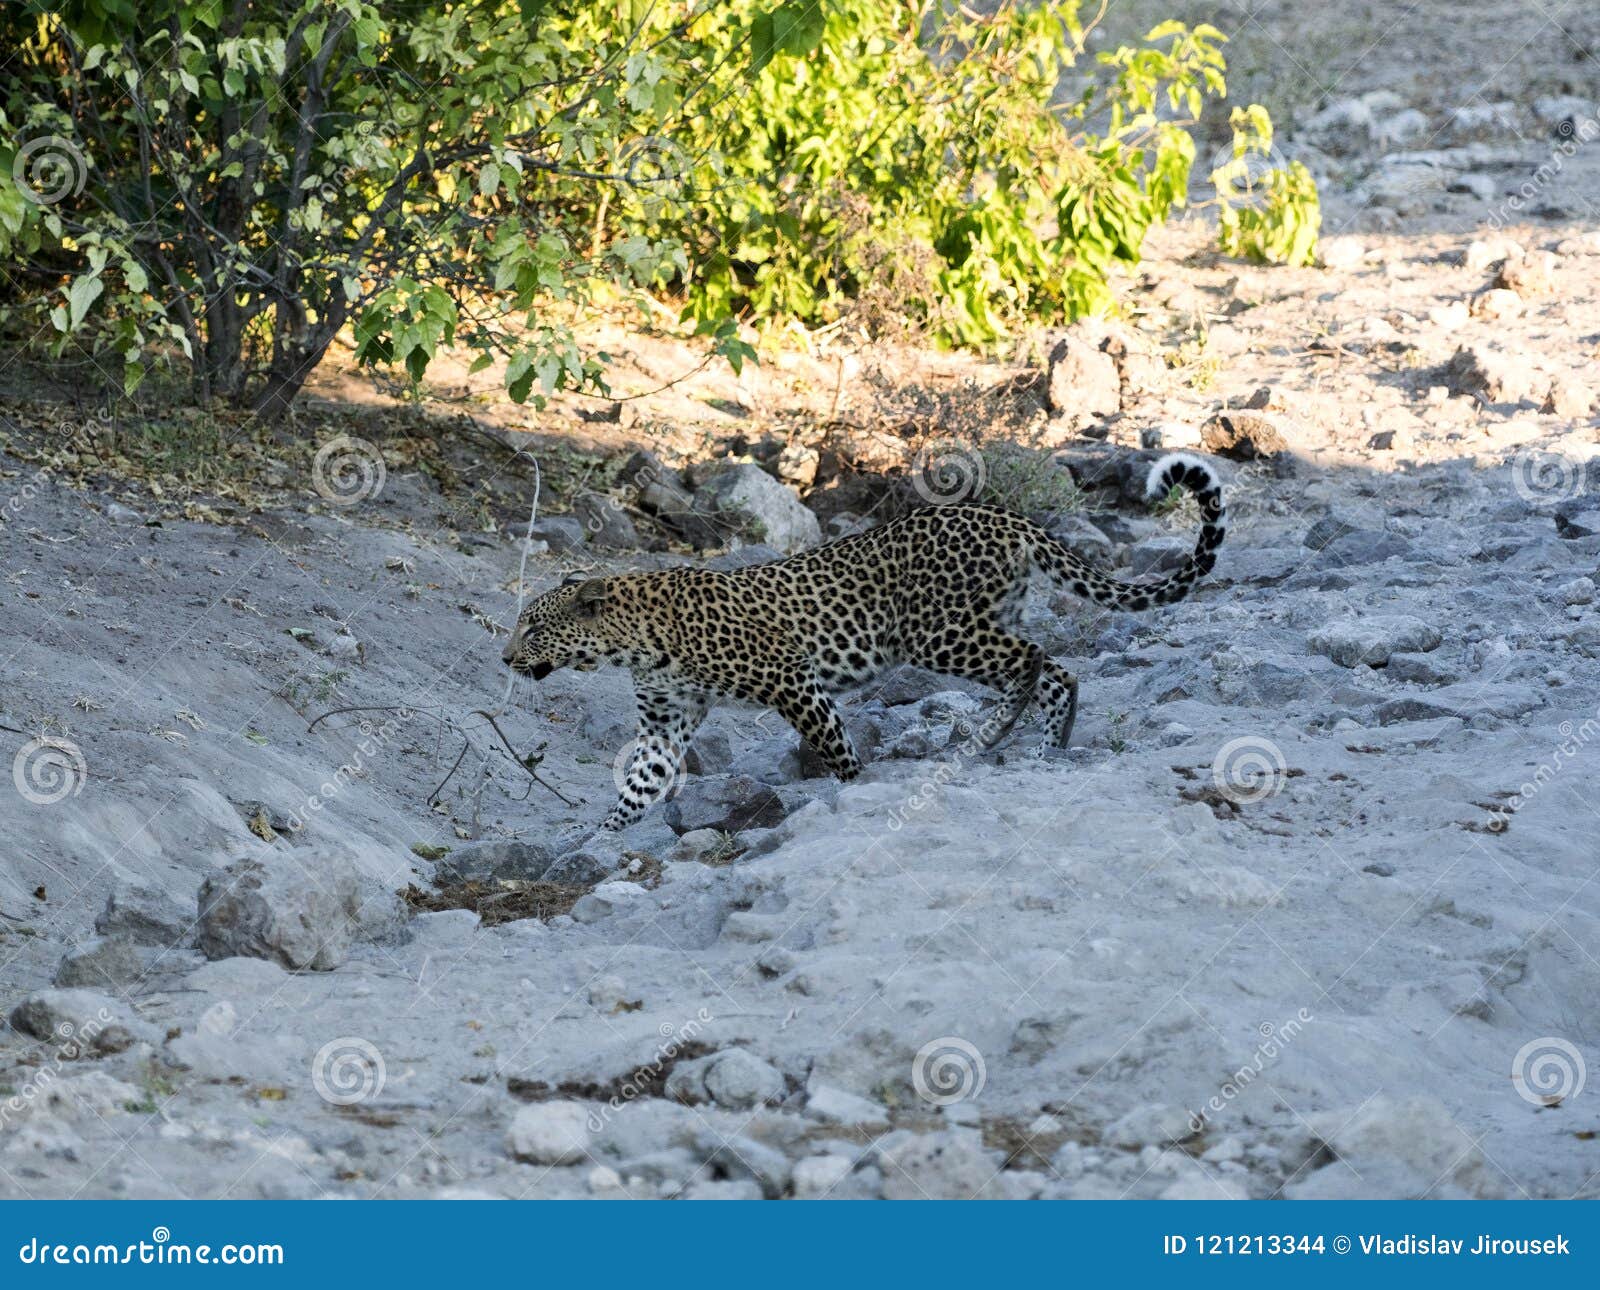 south african leopard, panthera pardus shortridge, is very rare in chobe national park, botswana